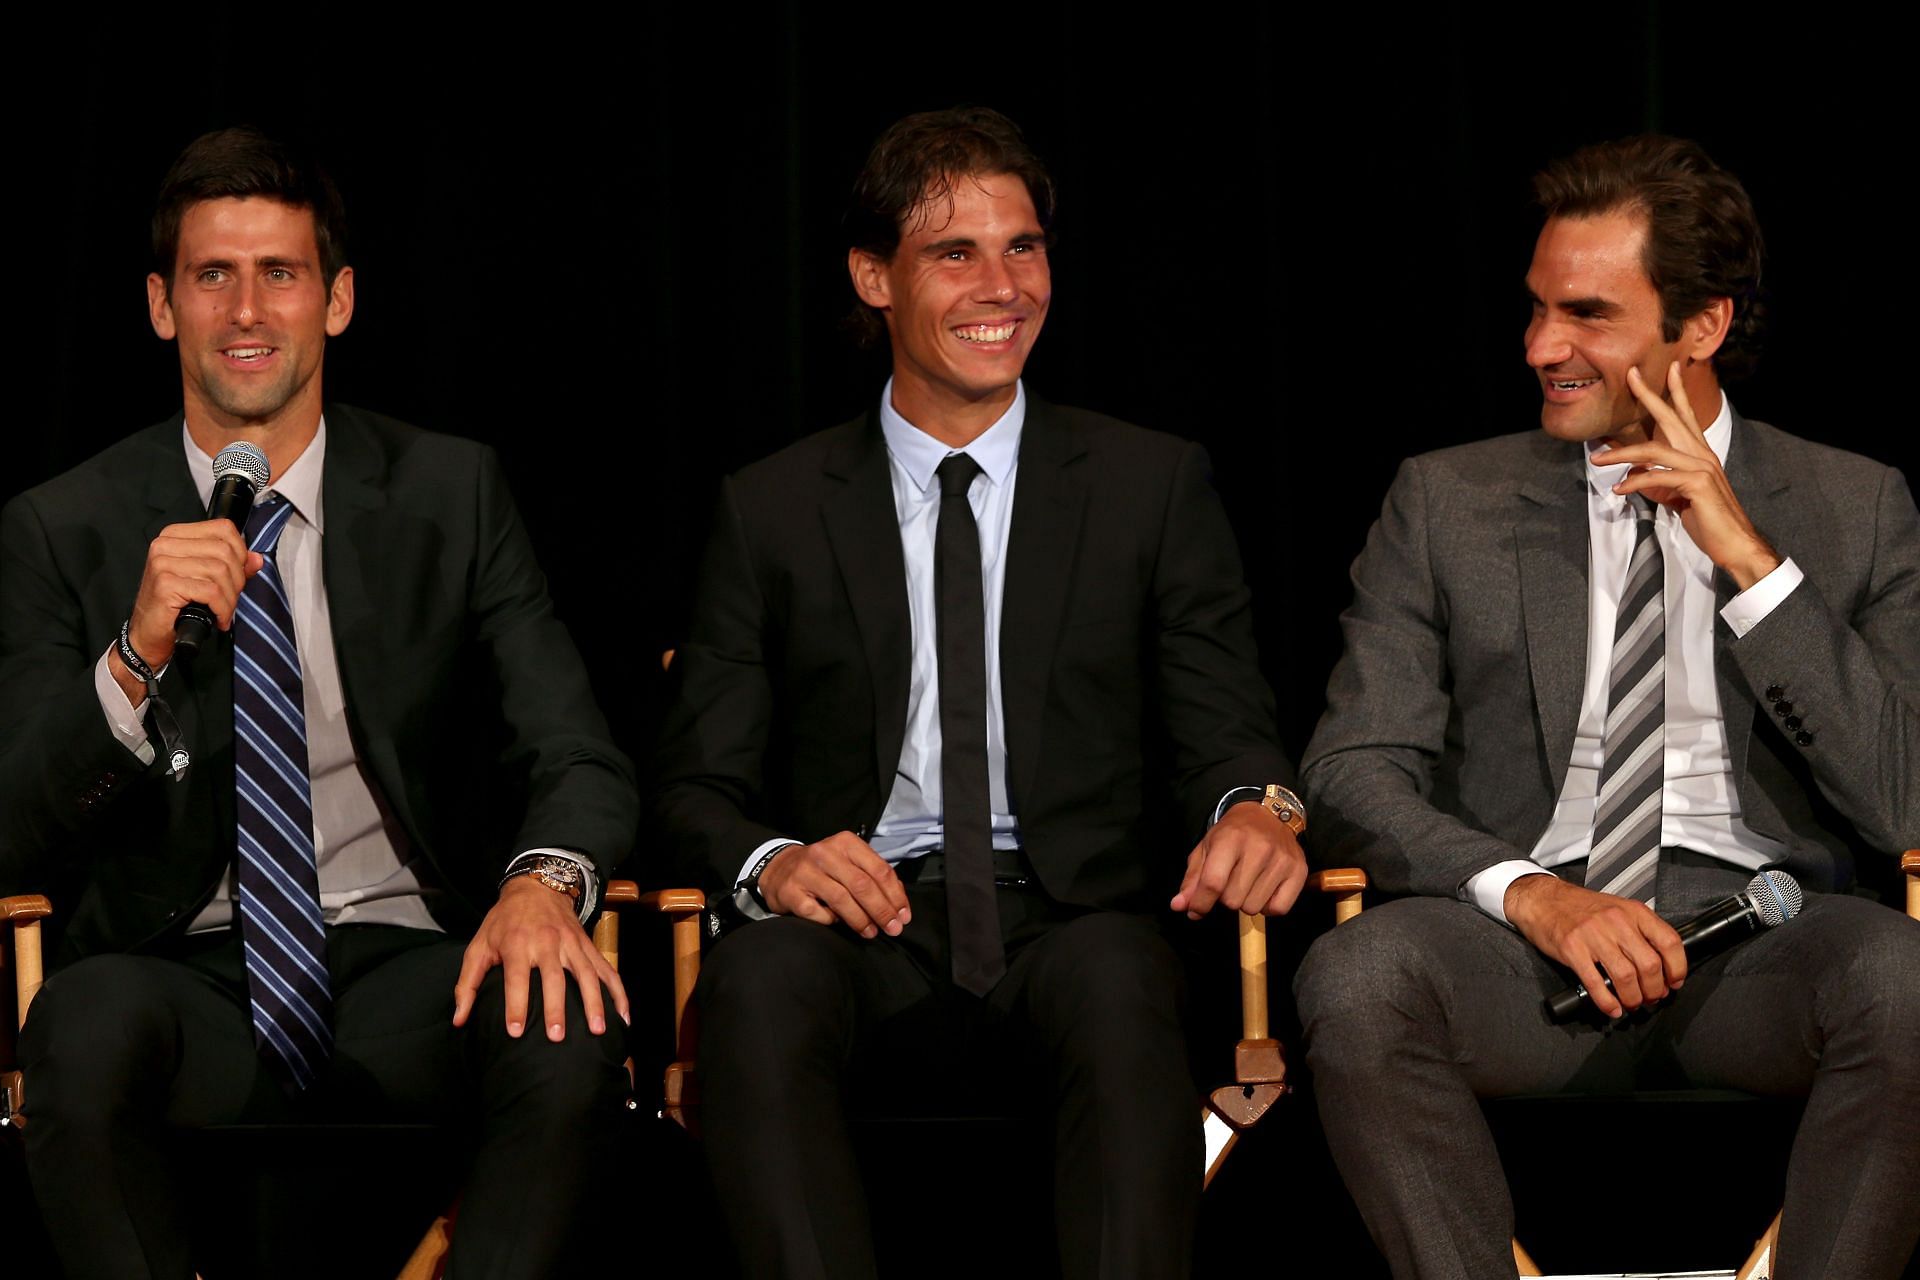 Big 3 at ATP Heritage Celebration in 2013. Photo by Matthew Stockman/Getty Images